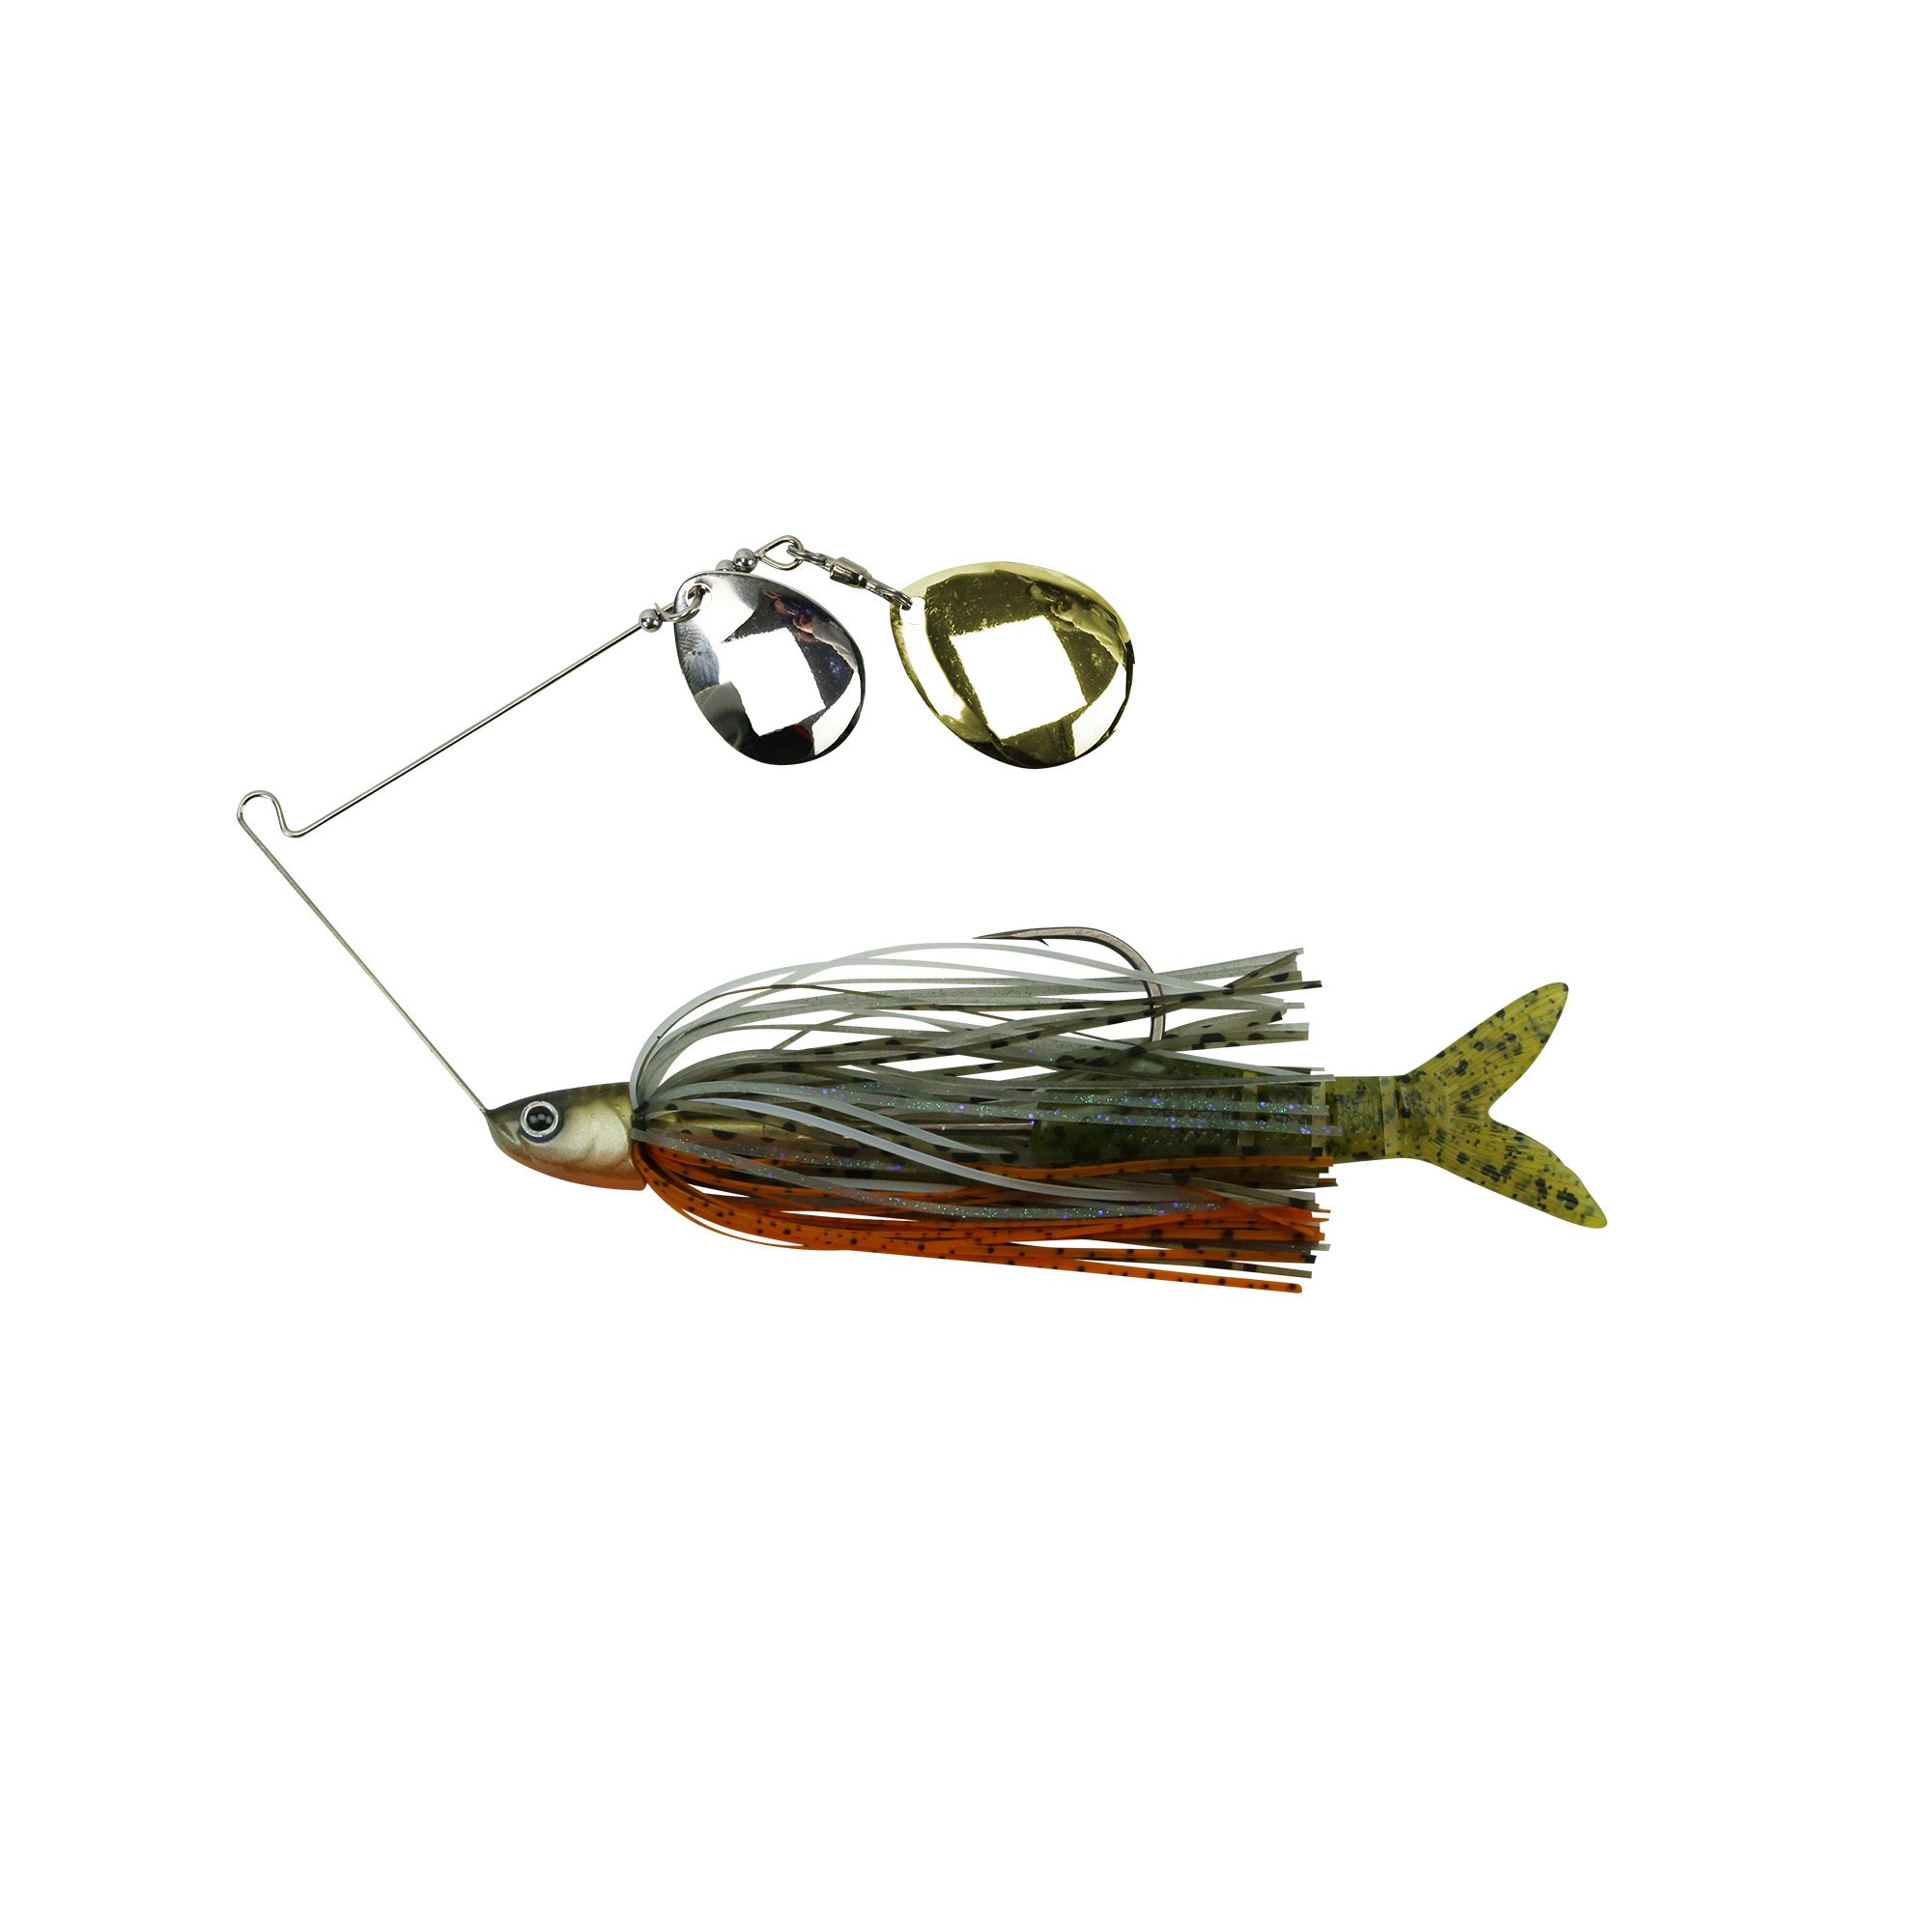 Expanded Z-Man ChatterBait Family: Experience the Big Blade - In-Fisherman